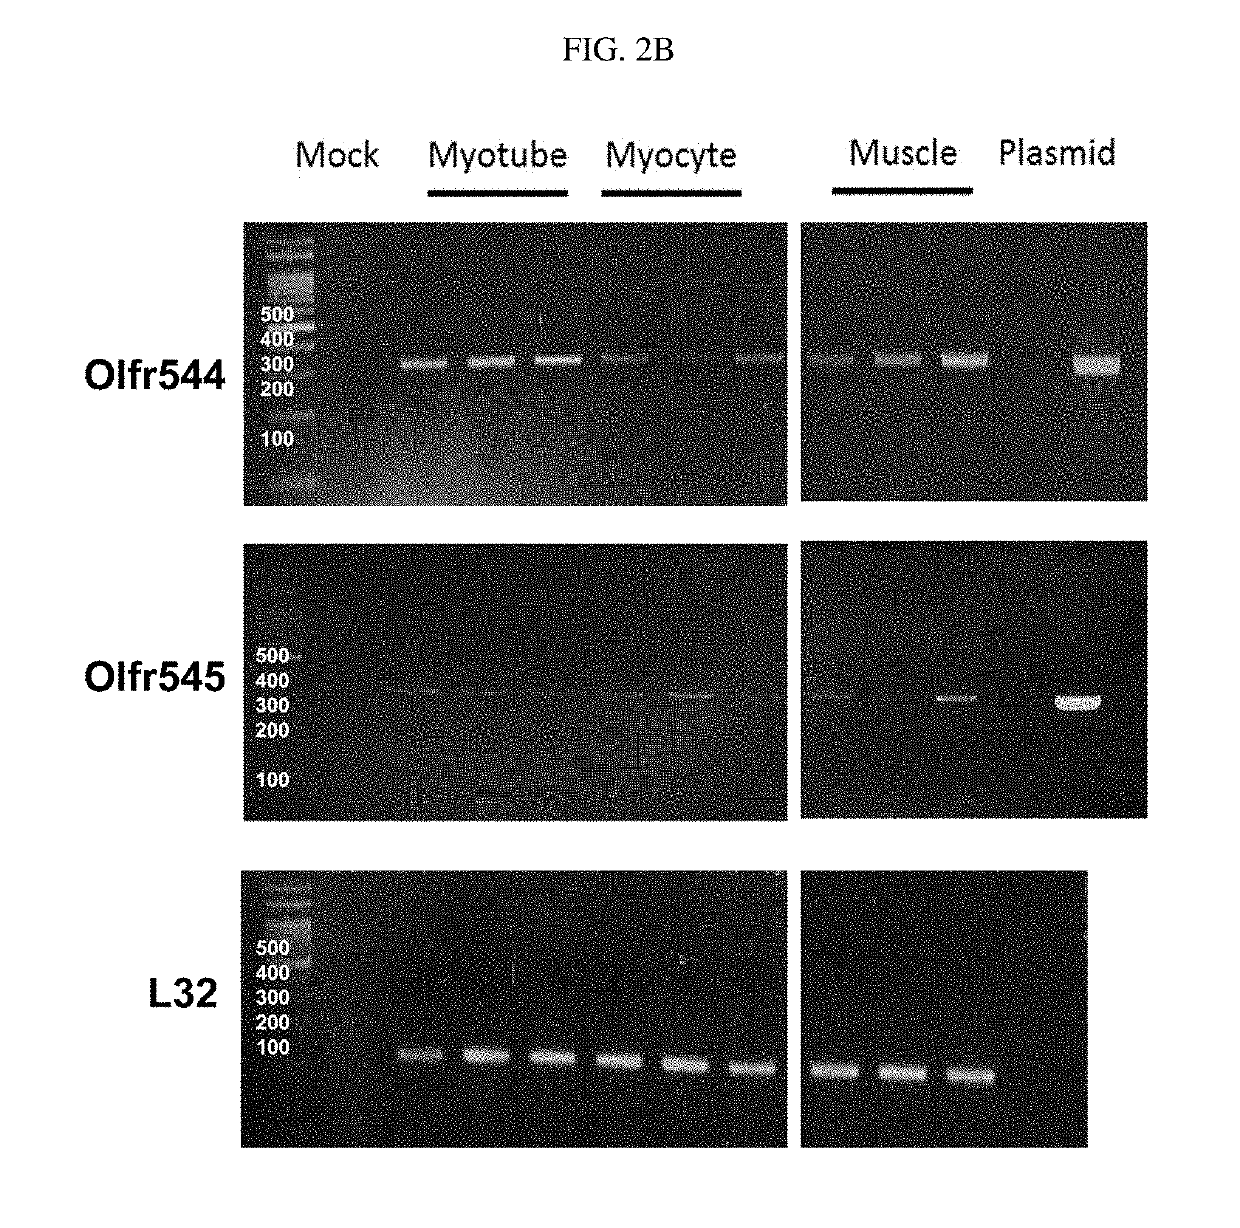 Composition for promoting skeletal muscle activity via induction of mitochondrial biogenesis comprising of azelaic acid as an active ingredient